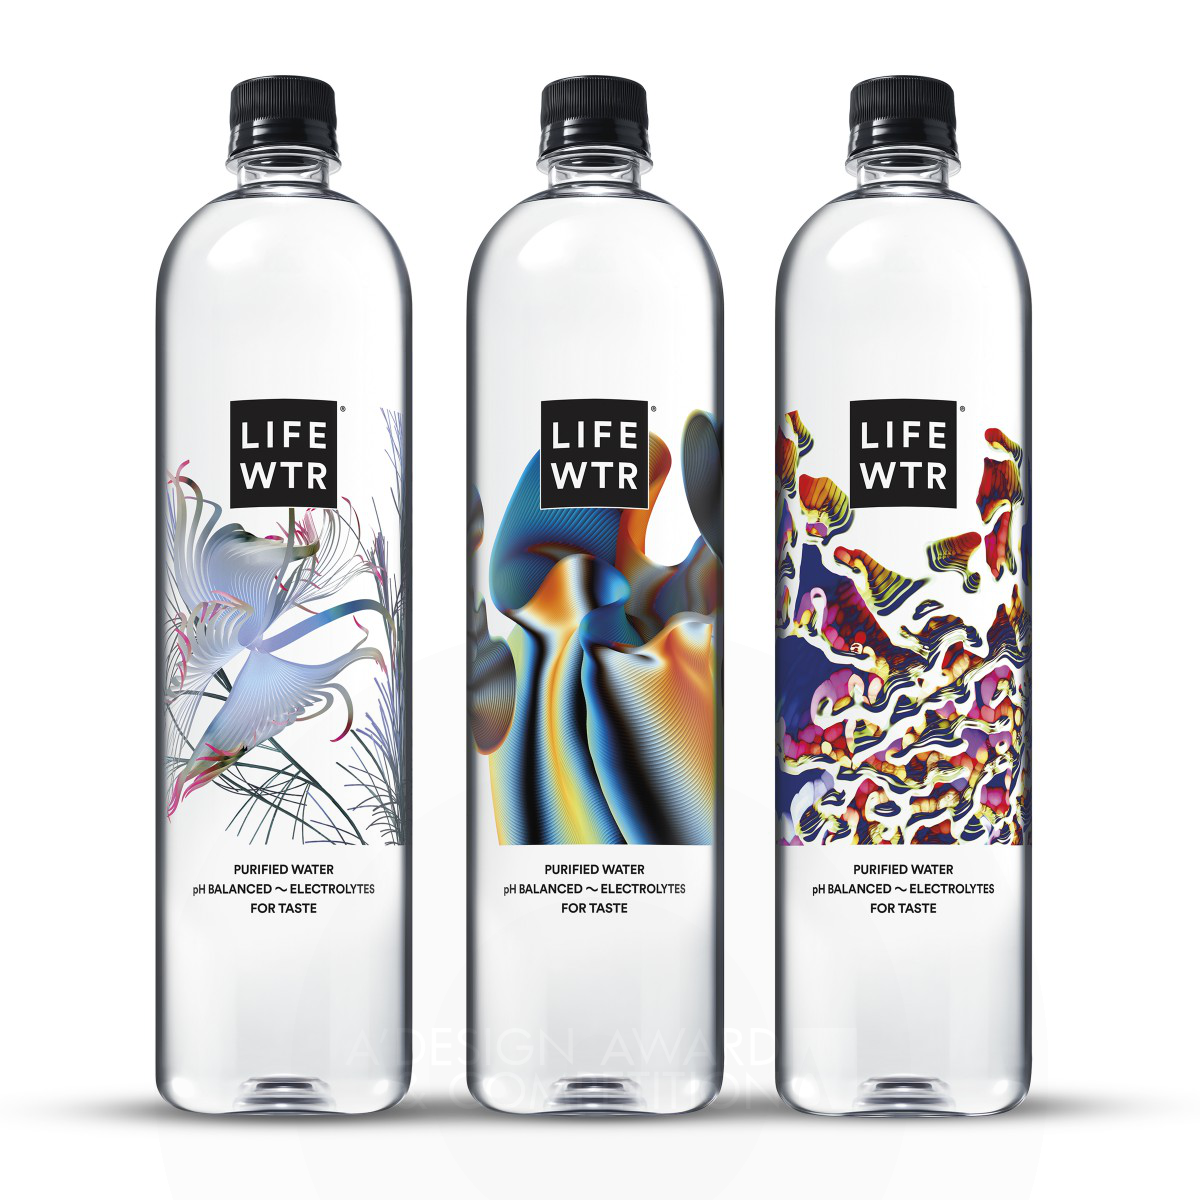 Lifewtr Series 7  Art through Technology Packaging by PepsiCo Design and Innovation